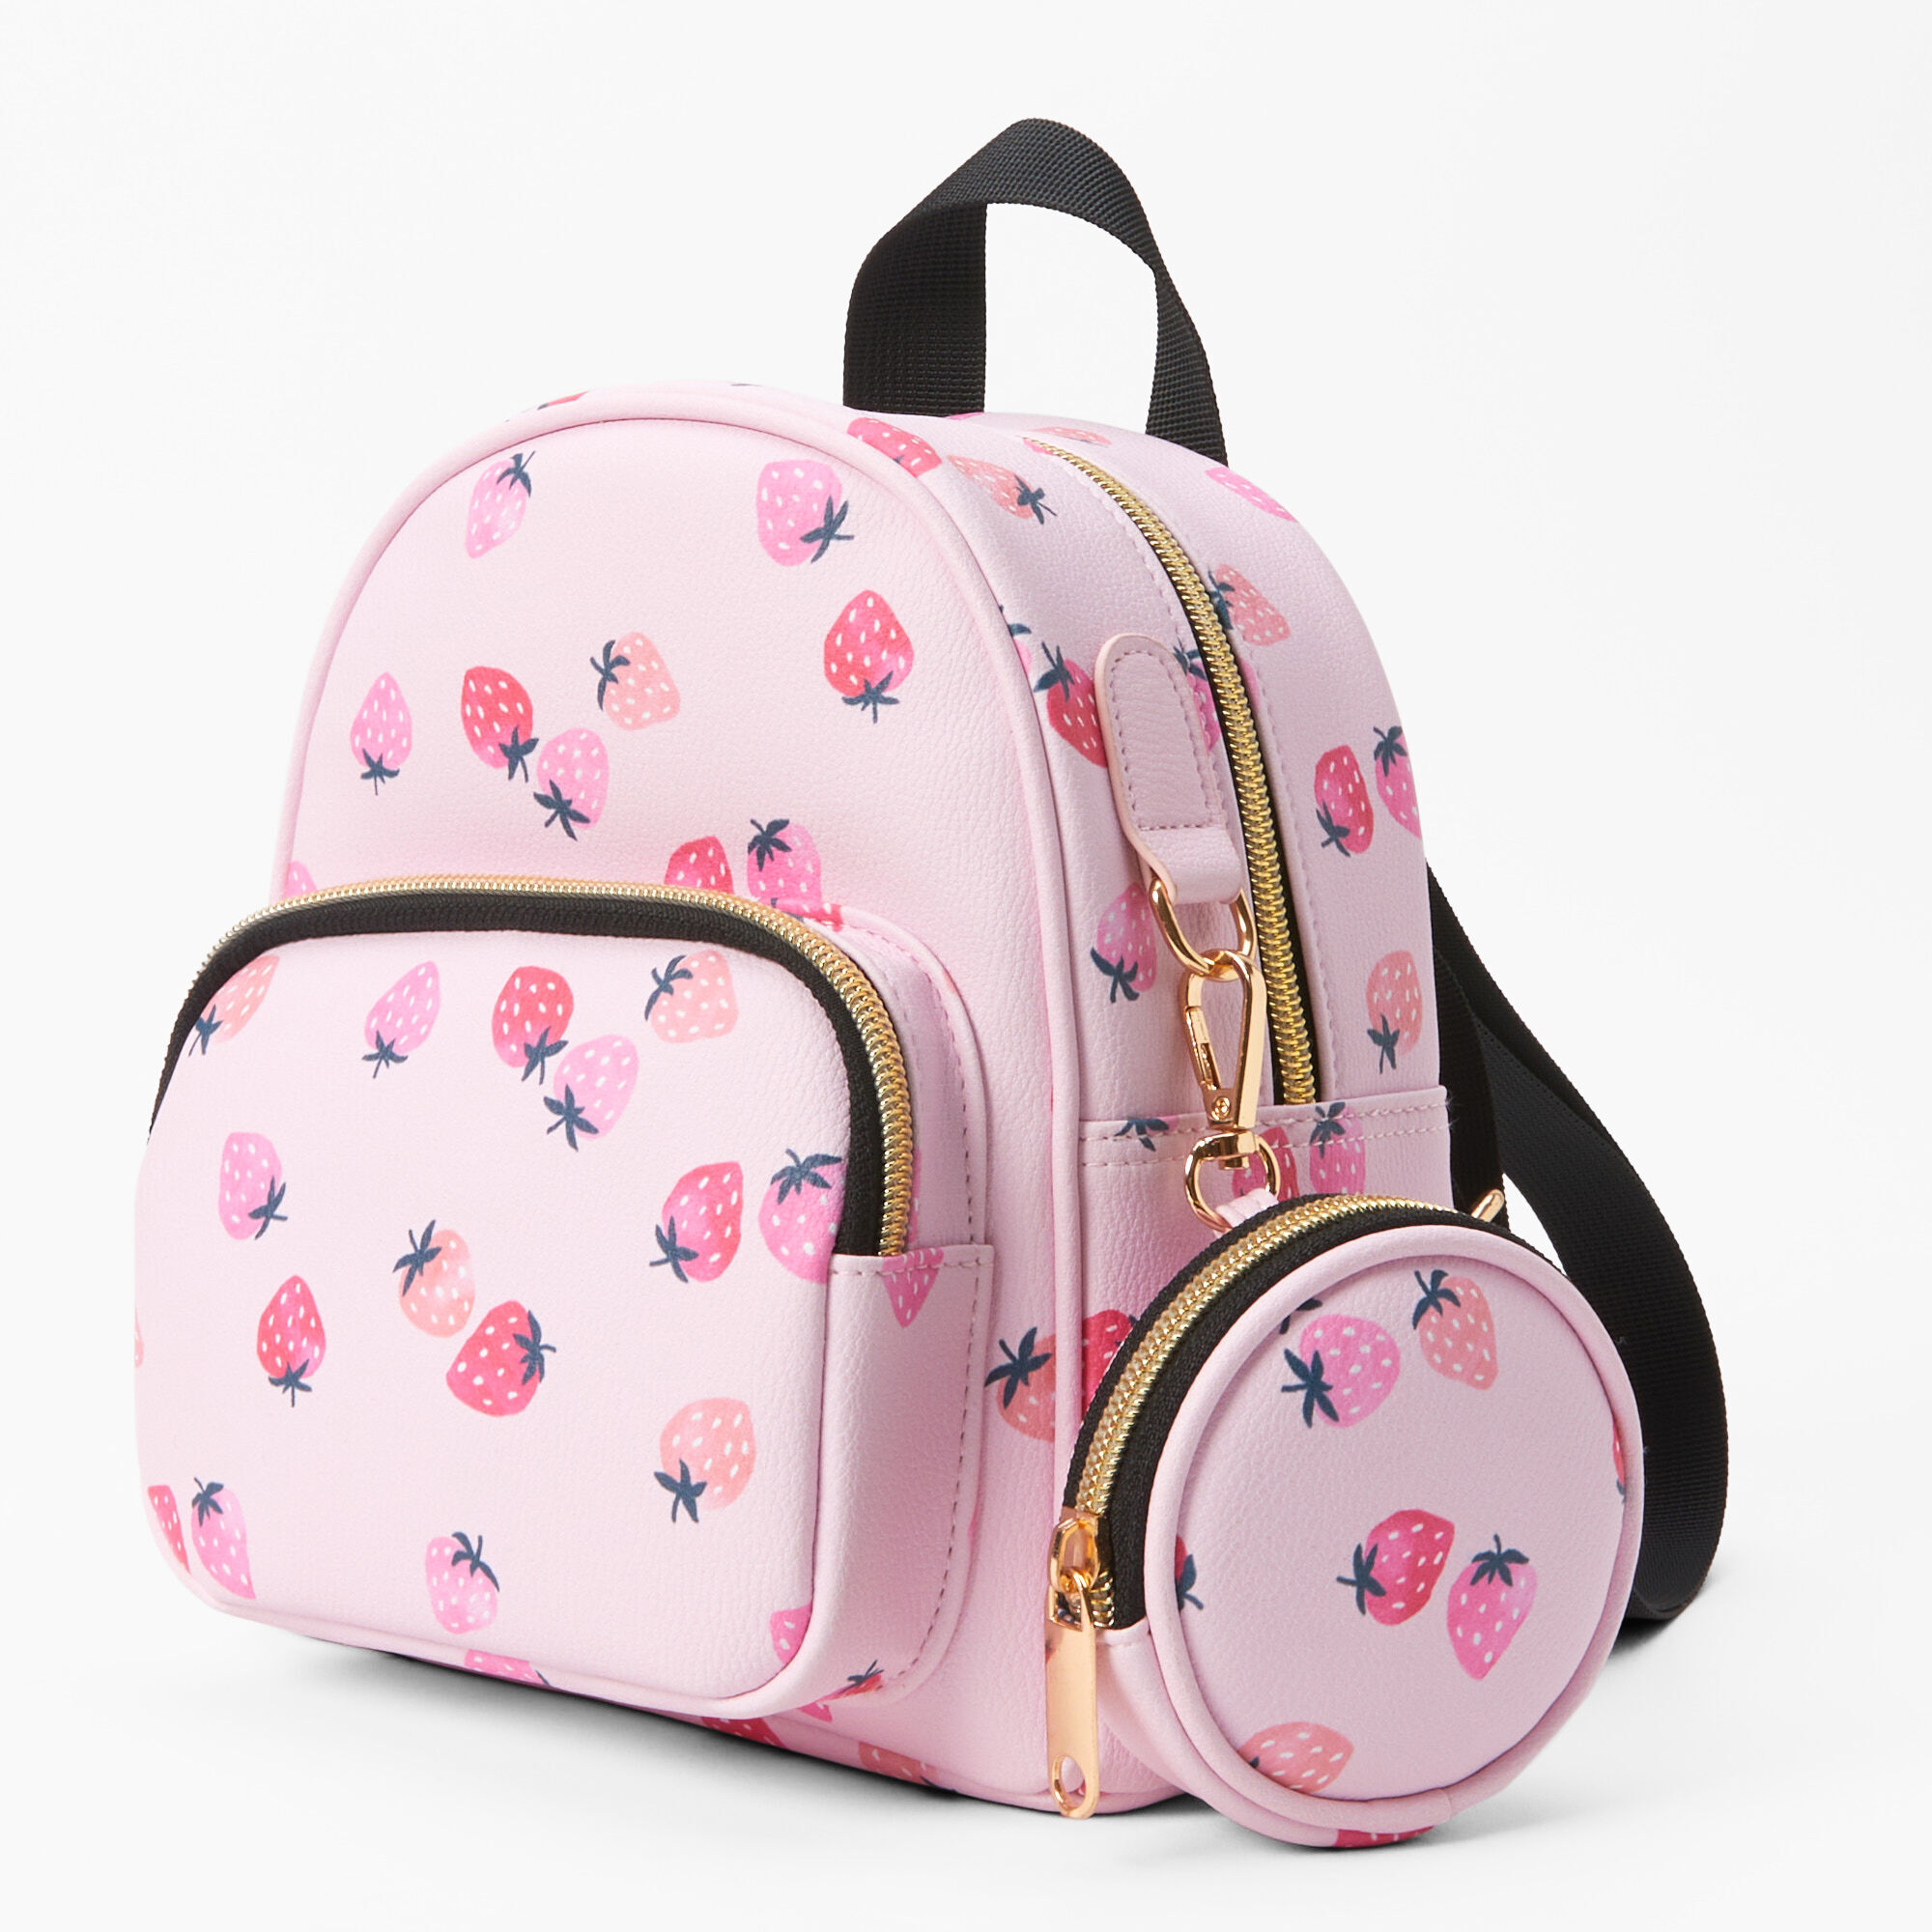 View Claires Mini Backpack Strawberry Pink information